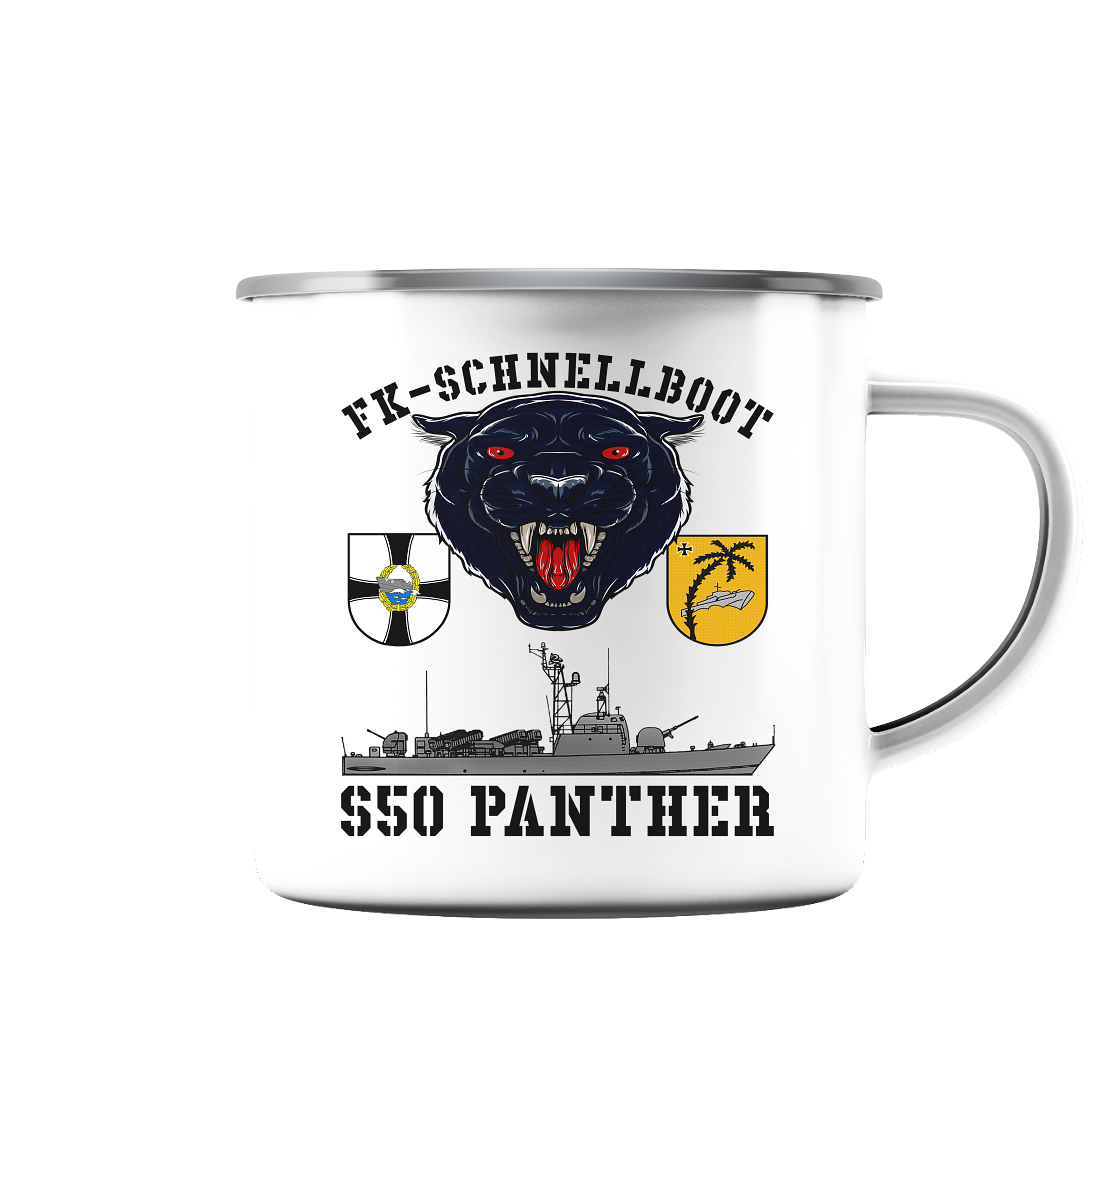 S50 PANTHER - Emaille Tasse (Silber)